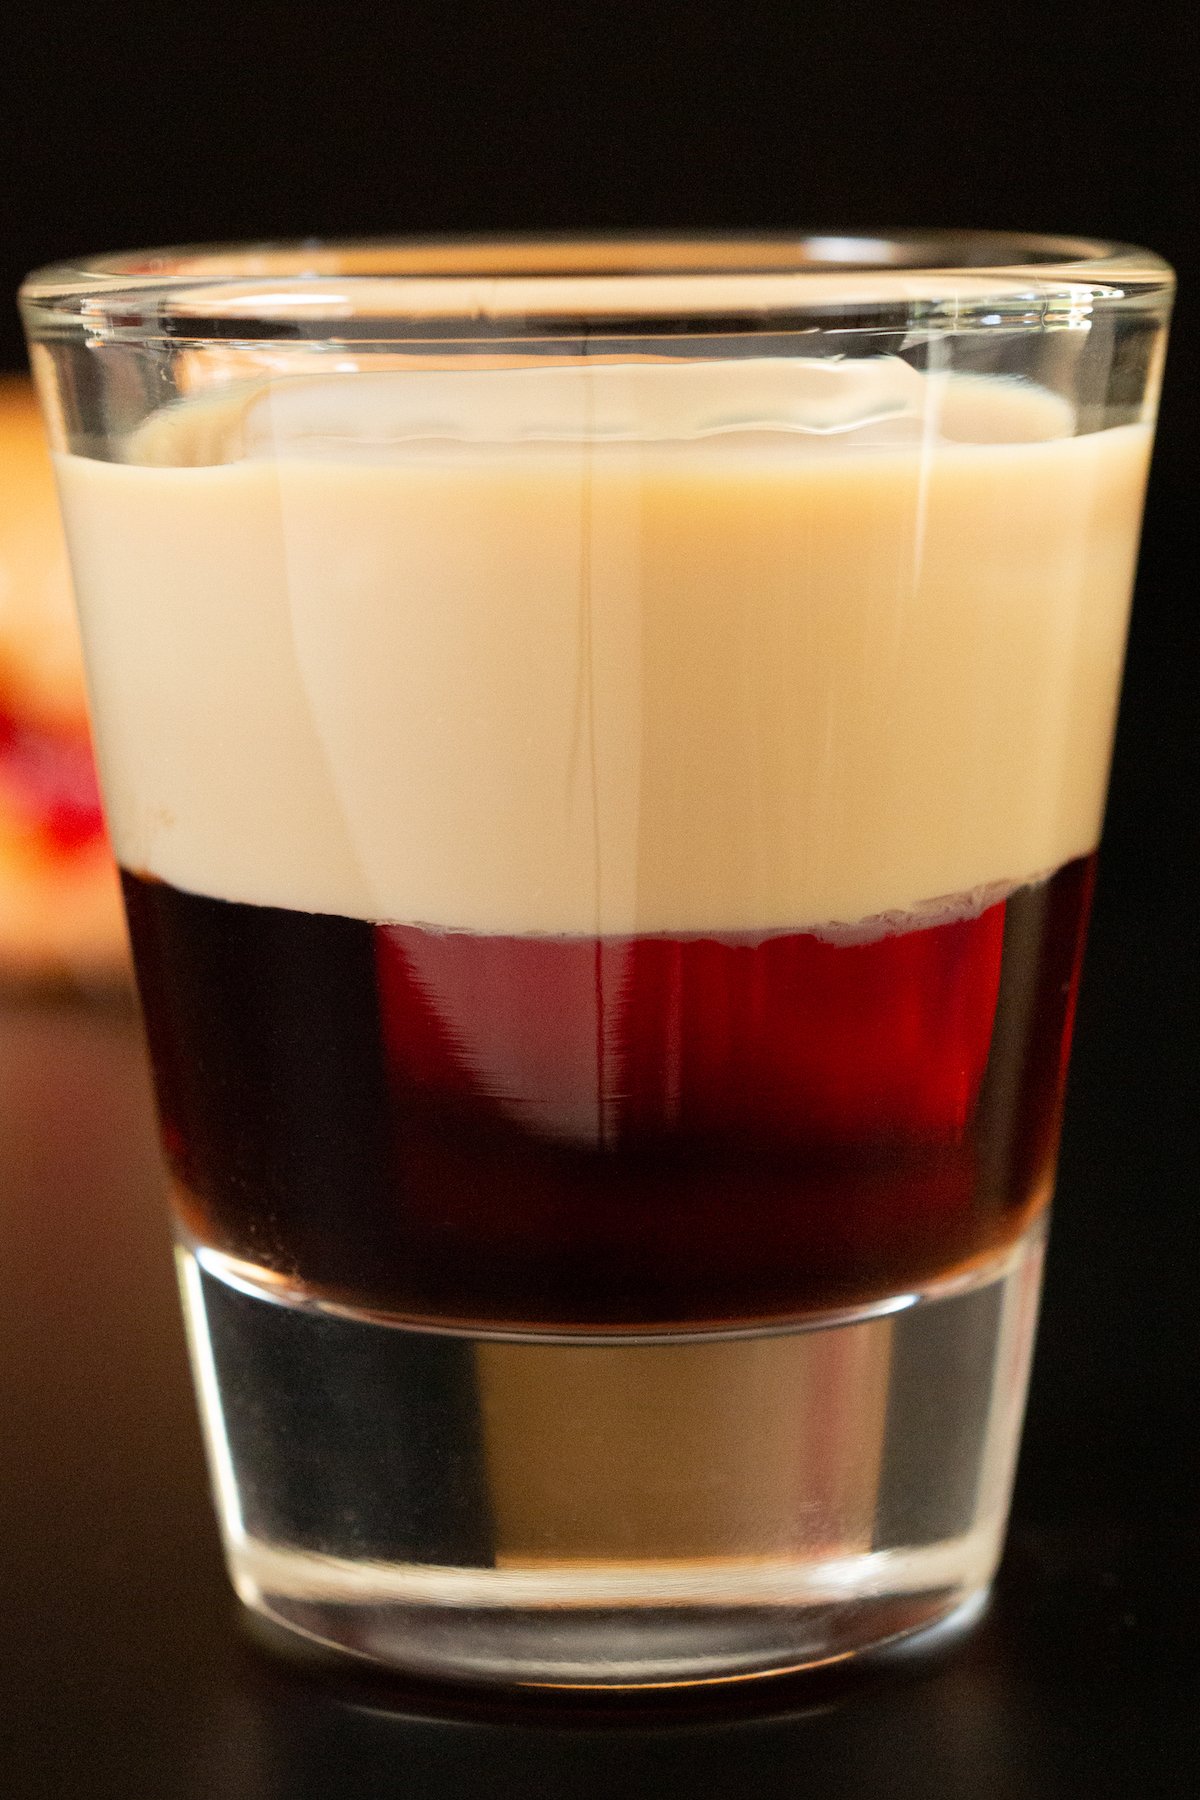 A shot glass is filled with two distinct layers - a crimson red on the bottom, and a creamy beige liqueur on top.